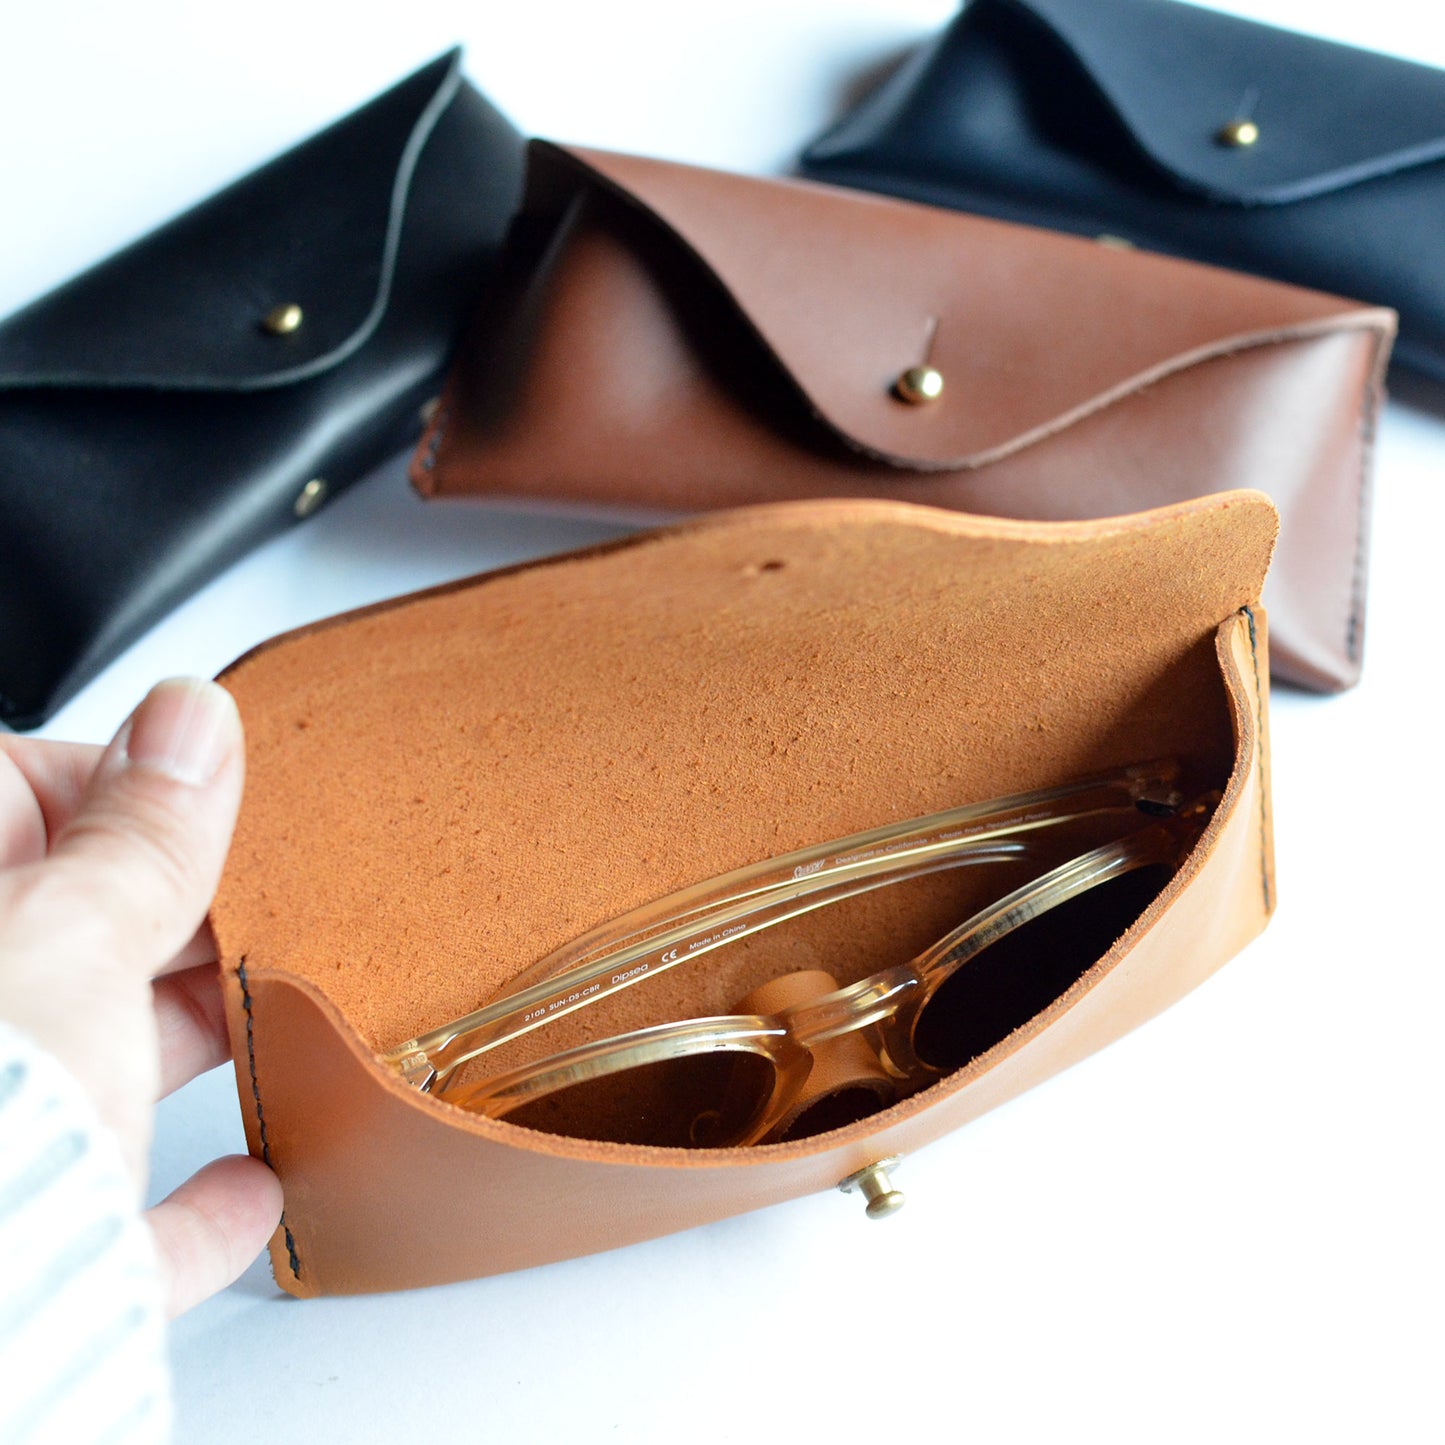 Sunglasses Case - Honey Brown Leather